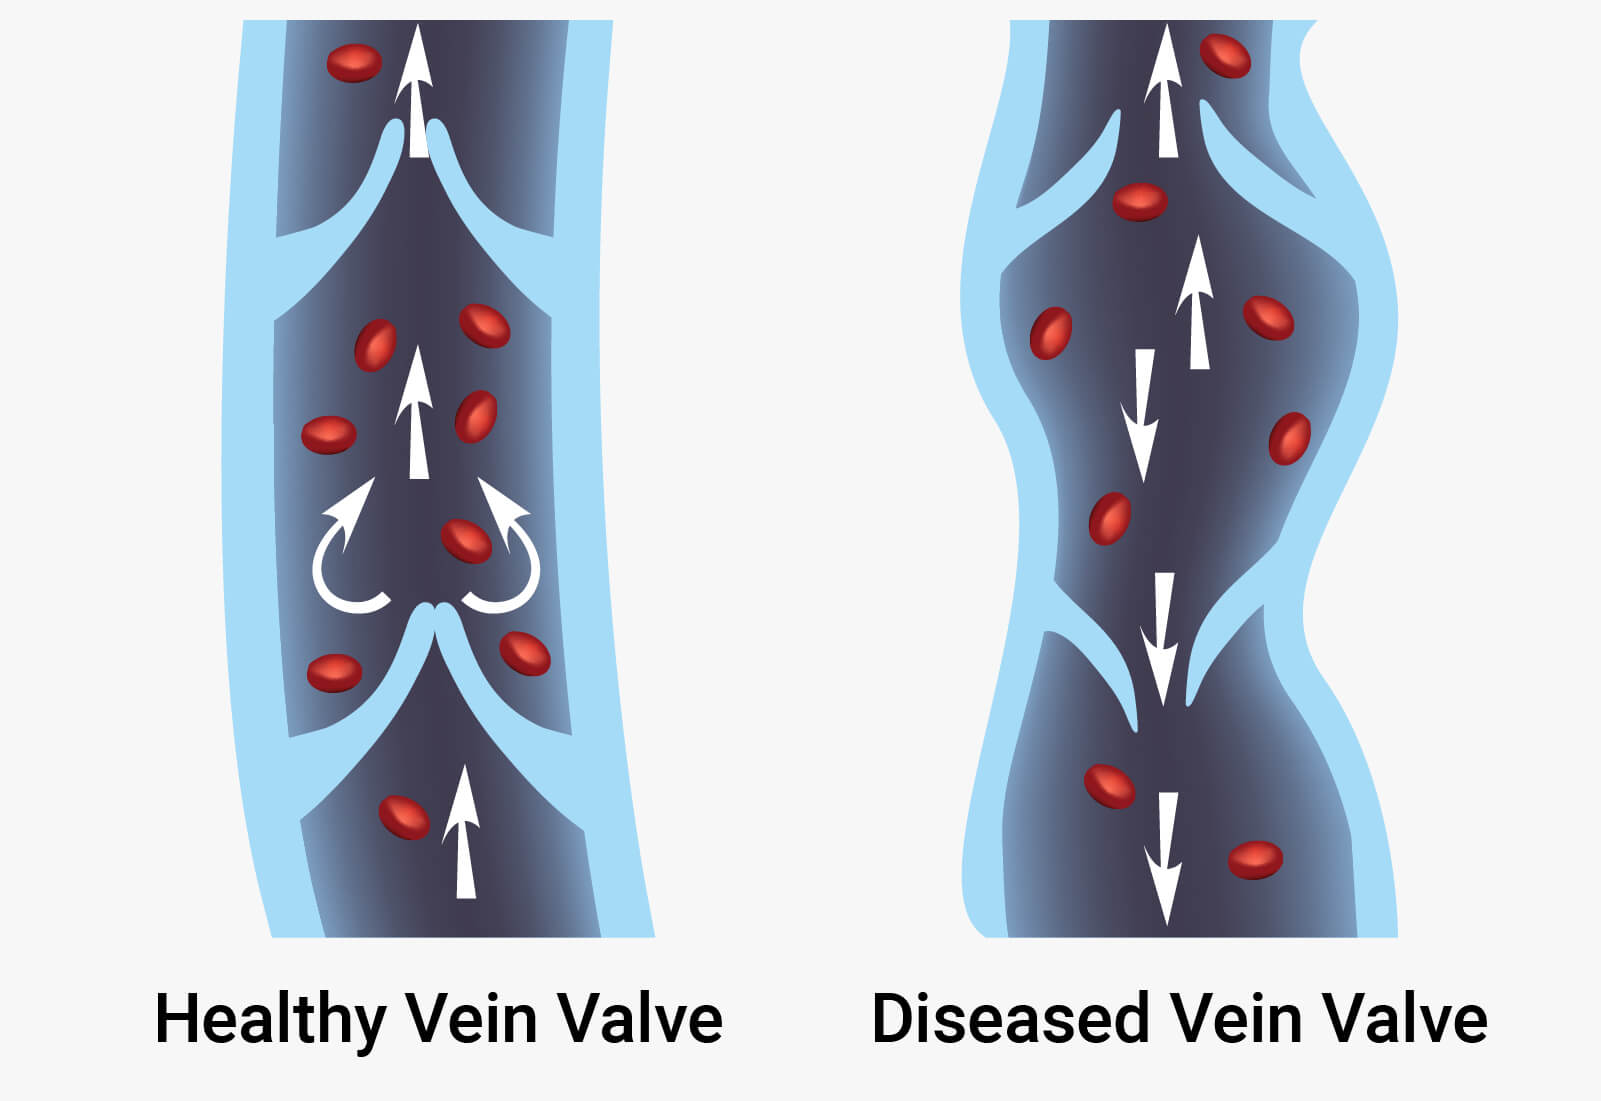 The anatomy of a vein showing healthly veins, where the blood can only flow one way, and an unhealthy vein where the blood is able to flow both ways.